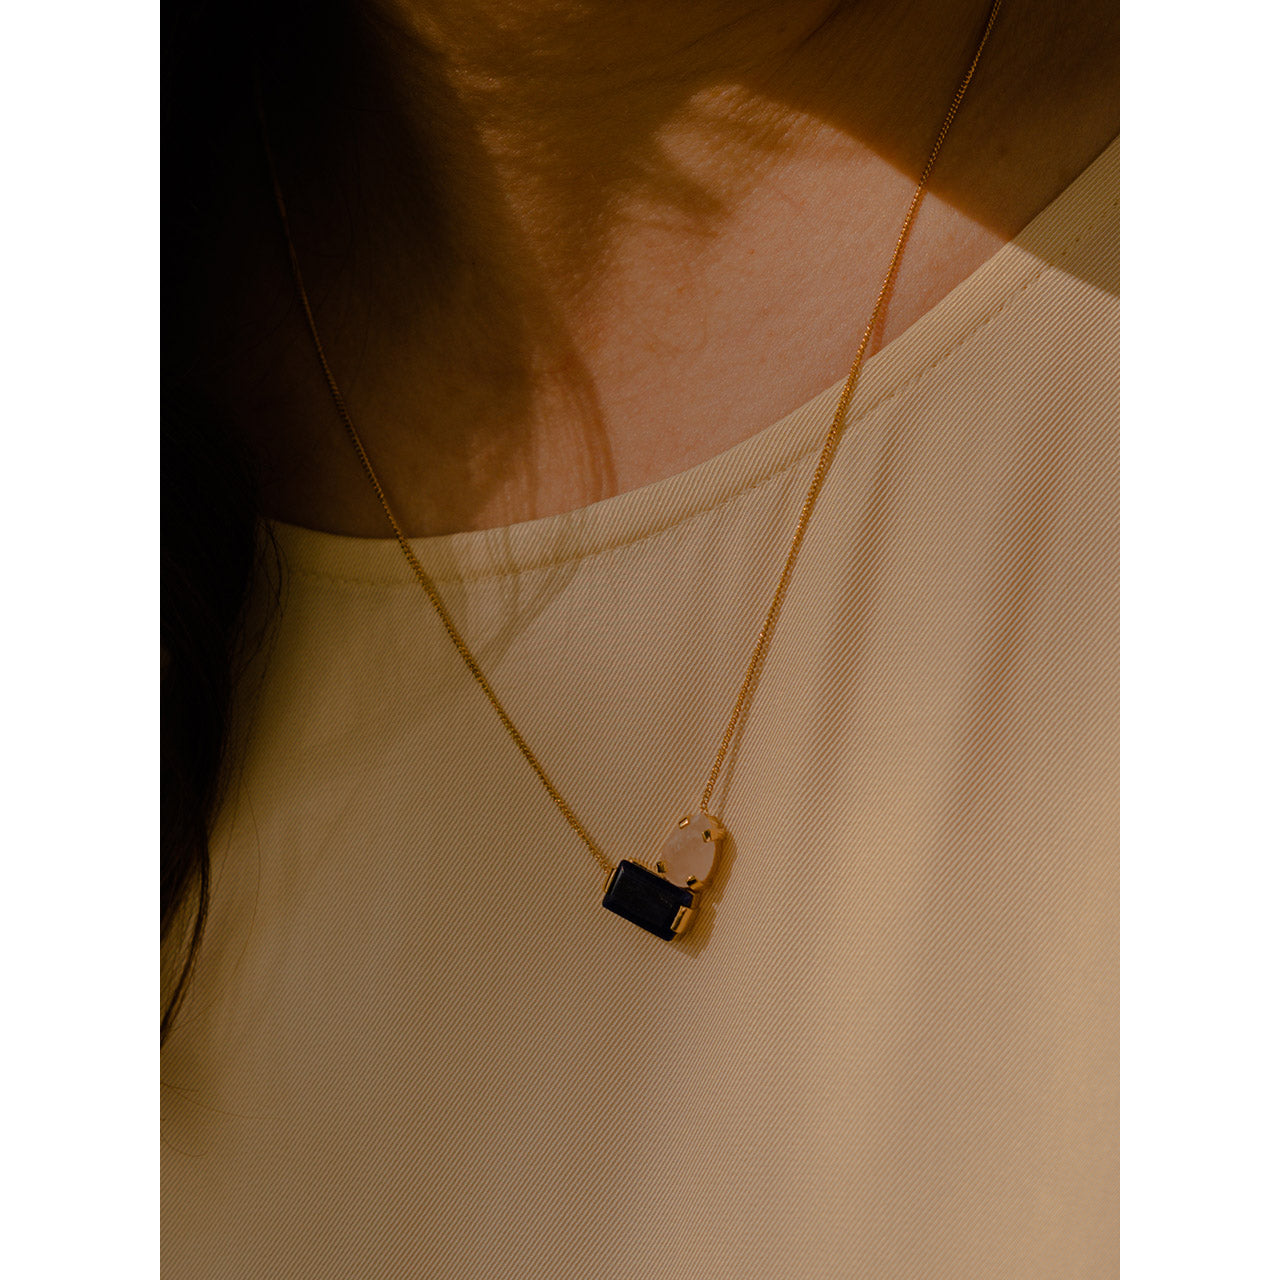 This necklace showcases a composition of an emerald-cut sodalite and a drop-shaped pink quartz, delicately suspended on a minimalistic gourmet chain.